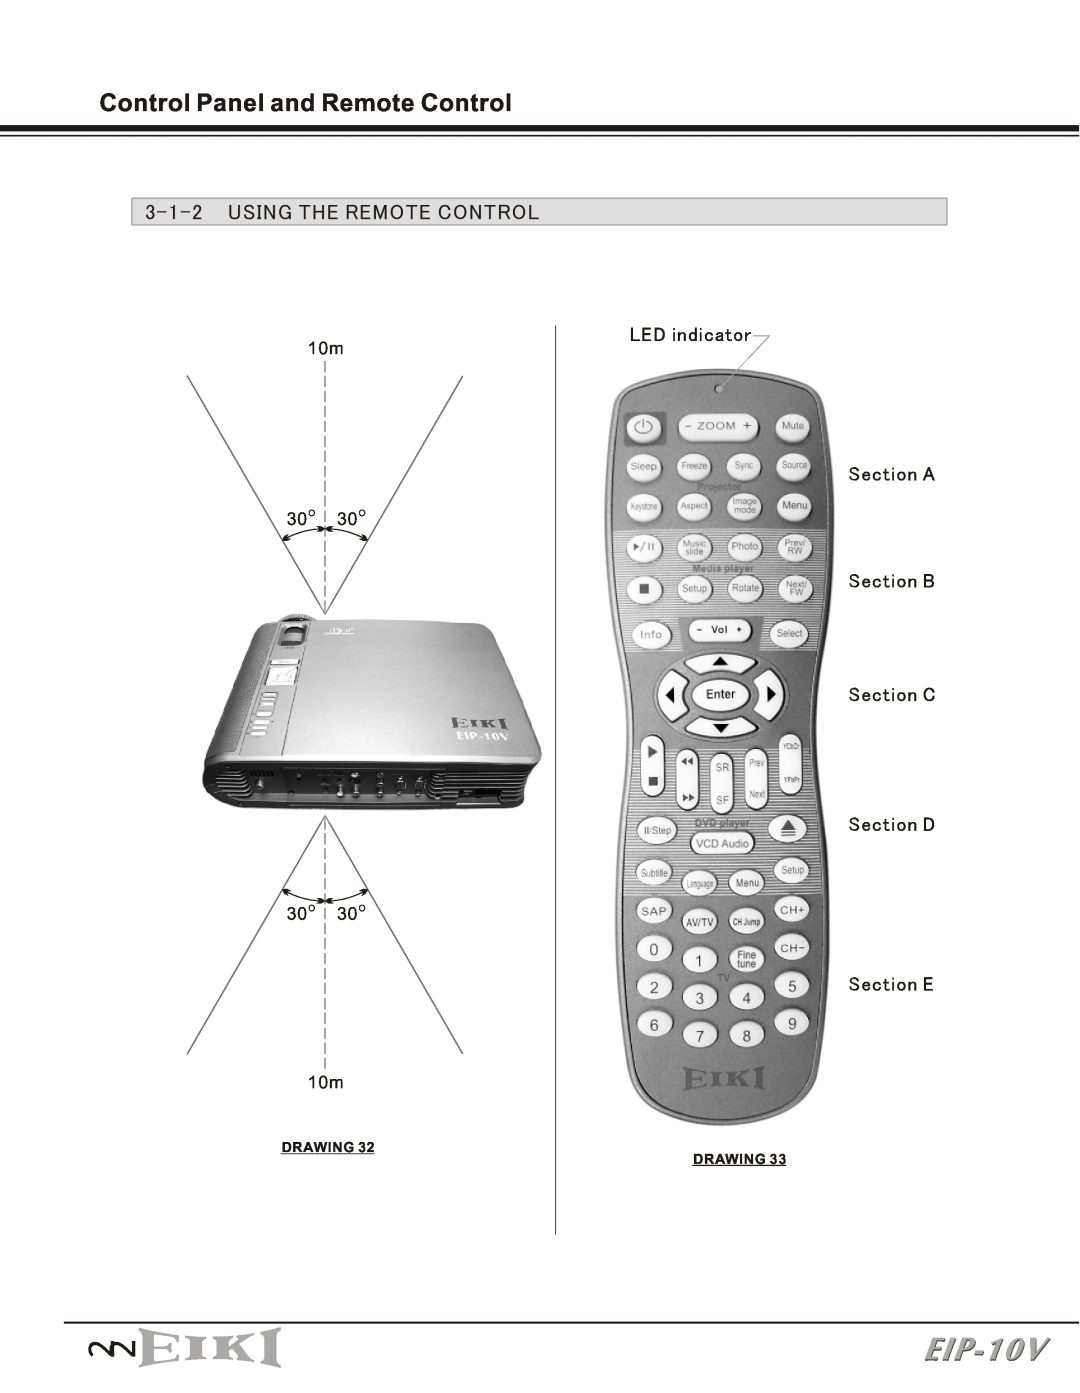 Eiki EIP-10V owner manual Control Panel and Remote Control, Using The Remote Control, Drawing Drawing 